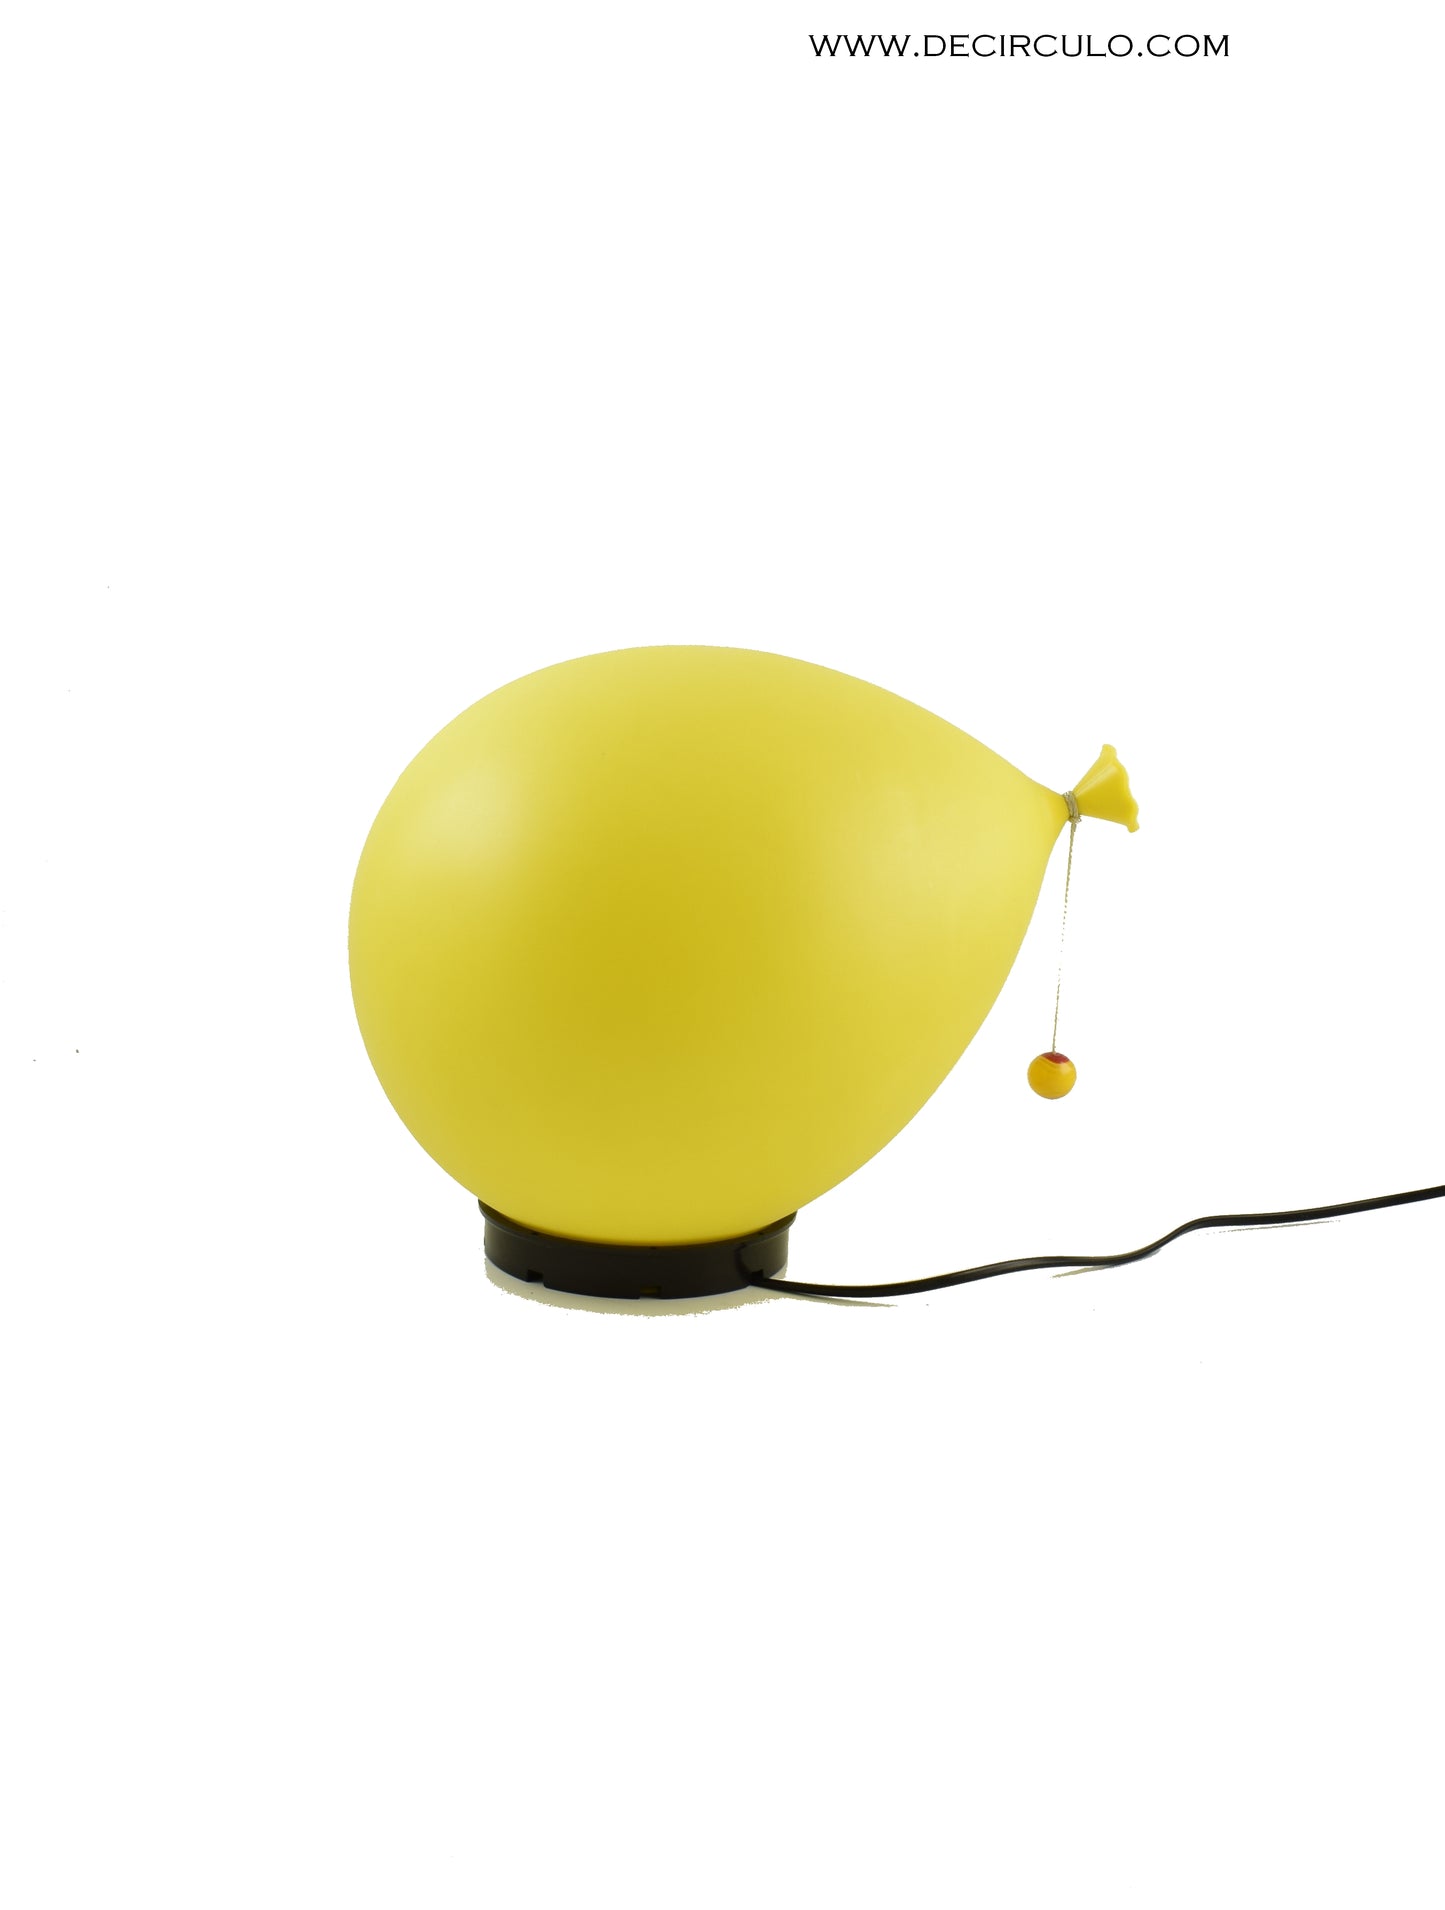 Balloon lamp designed by Yves Christin for Bilumen table or wall/ceiling light, Italy 1970s diffuser of blown plastic and black ABS base